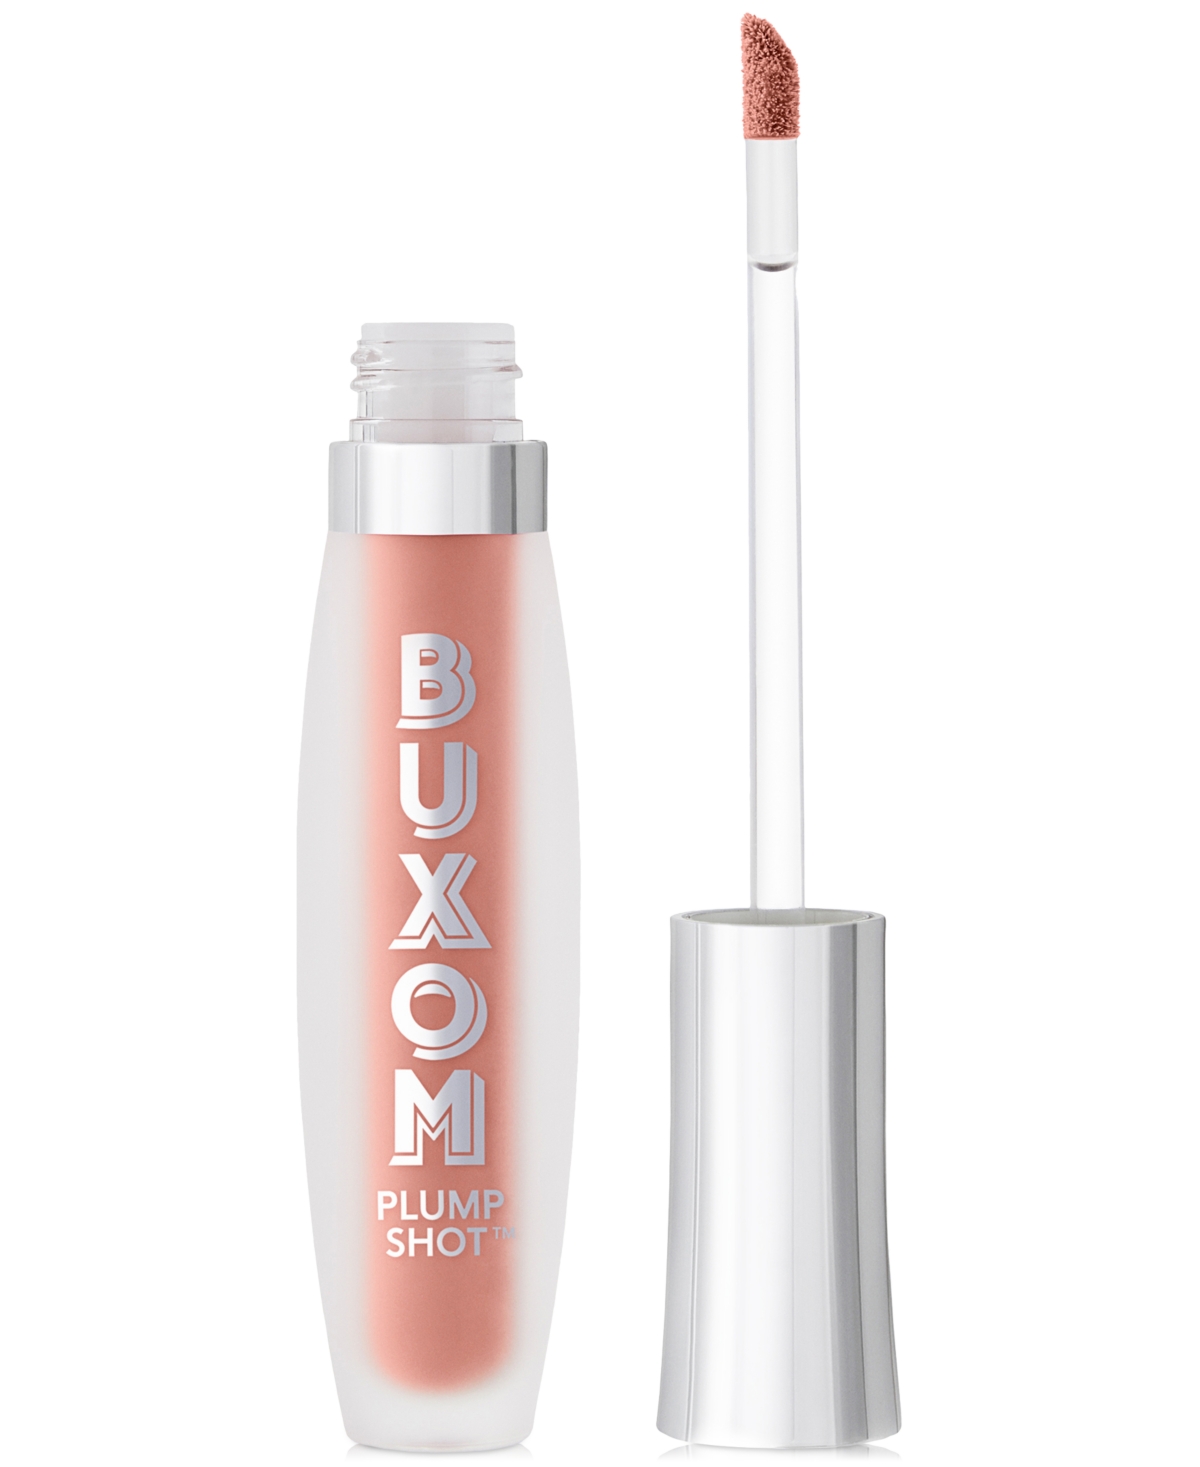 Buxom Cosmetics Plump Shot Collagen Infused Plumping Lip Serum In Exposed (nude)